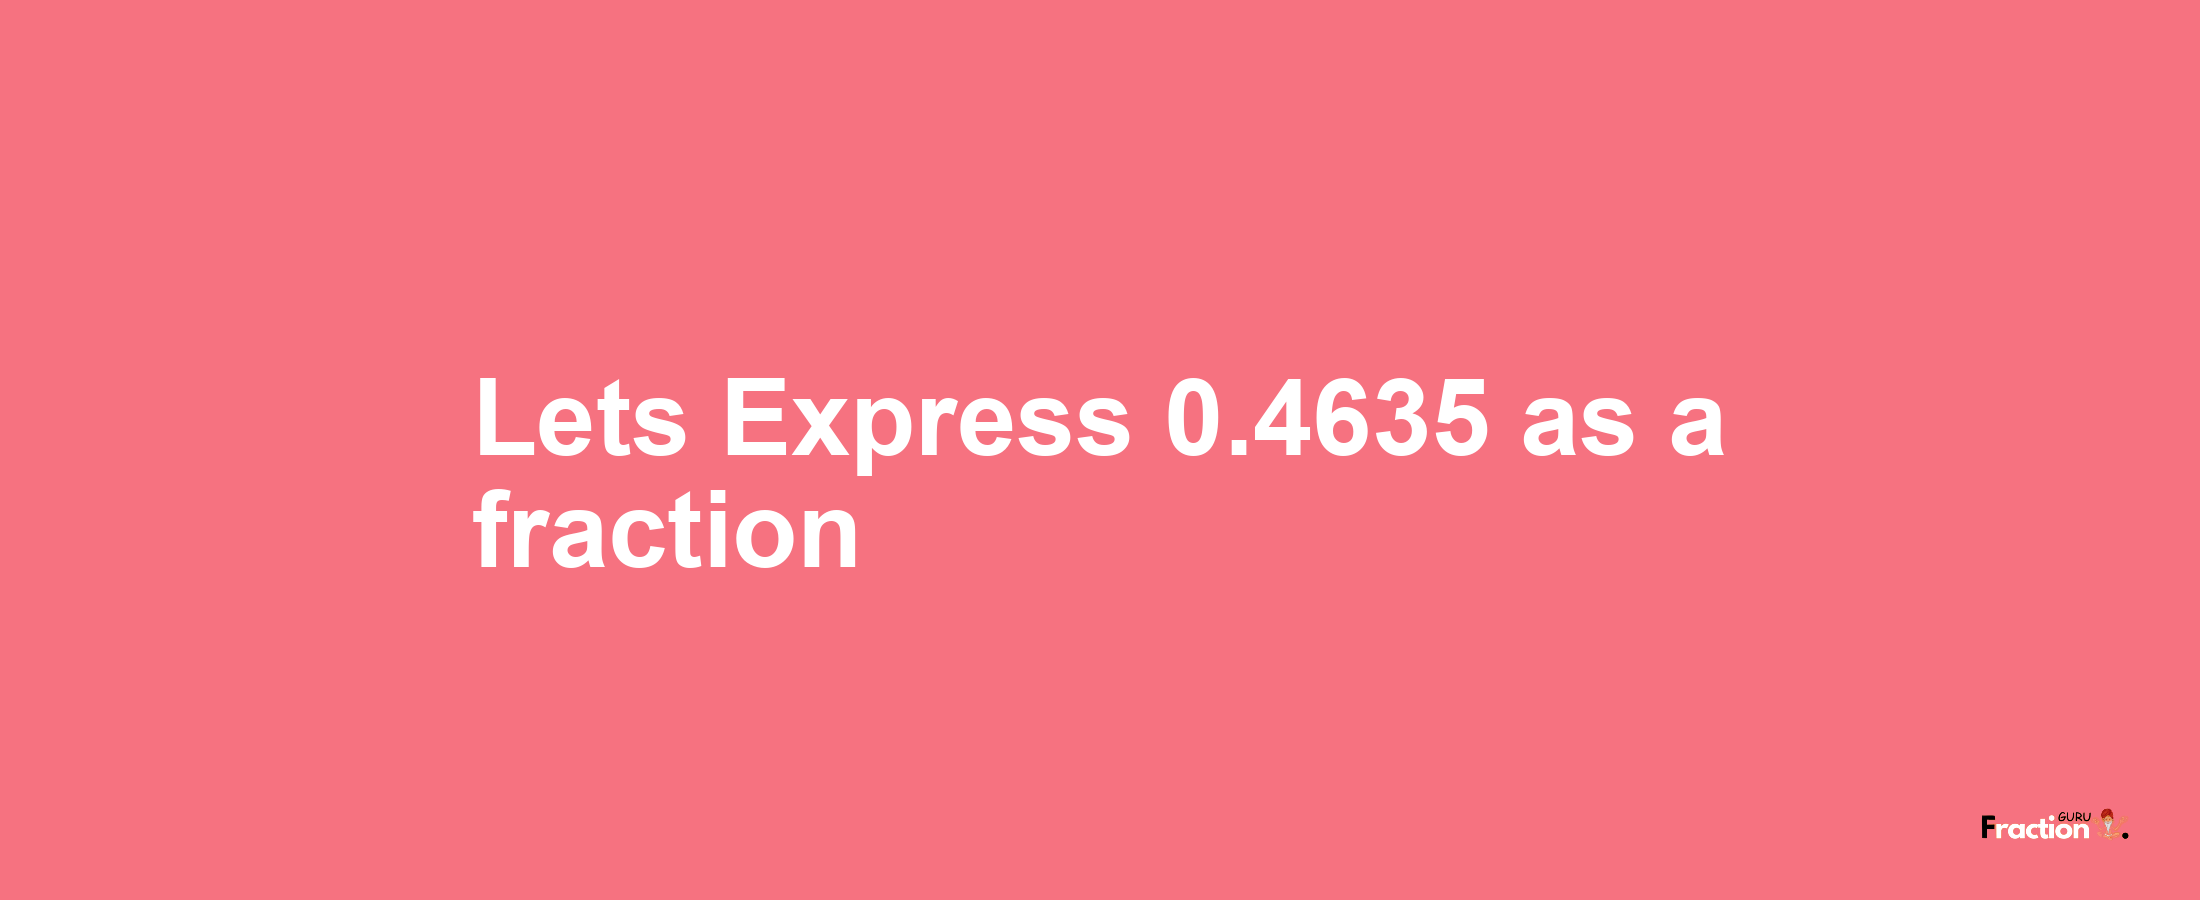 Lets Express 0.4635 as afraction